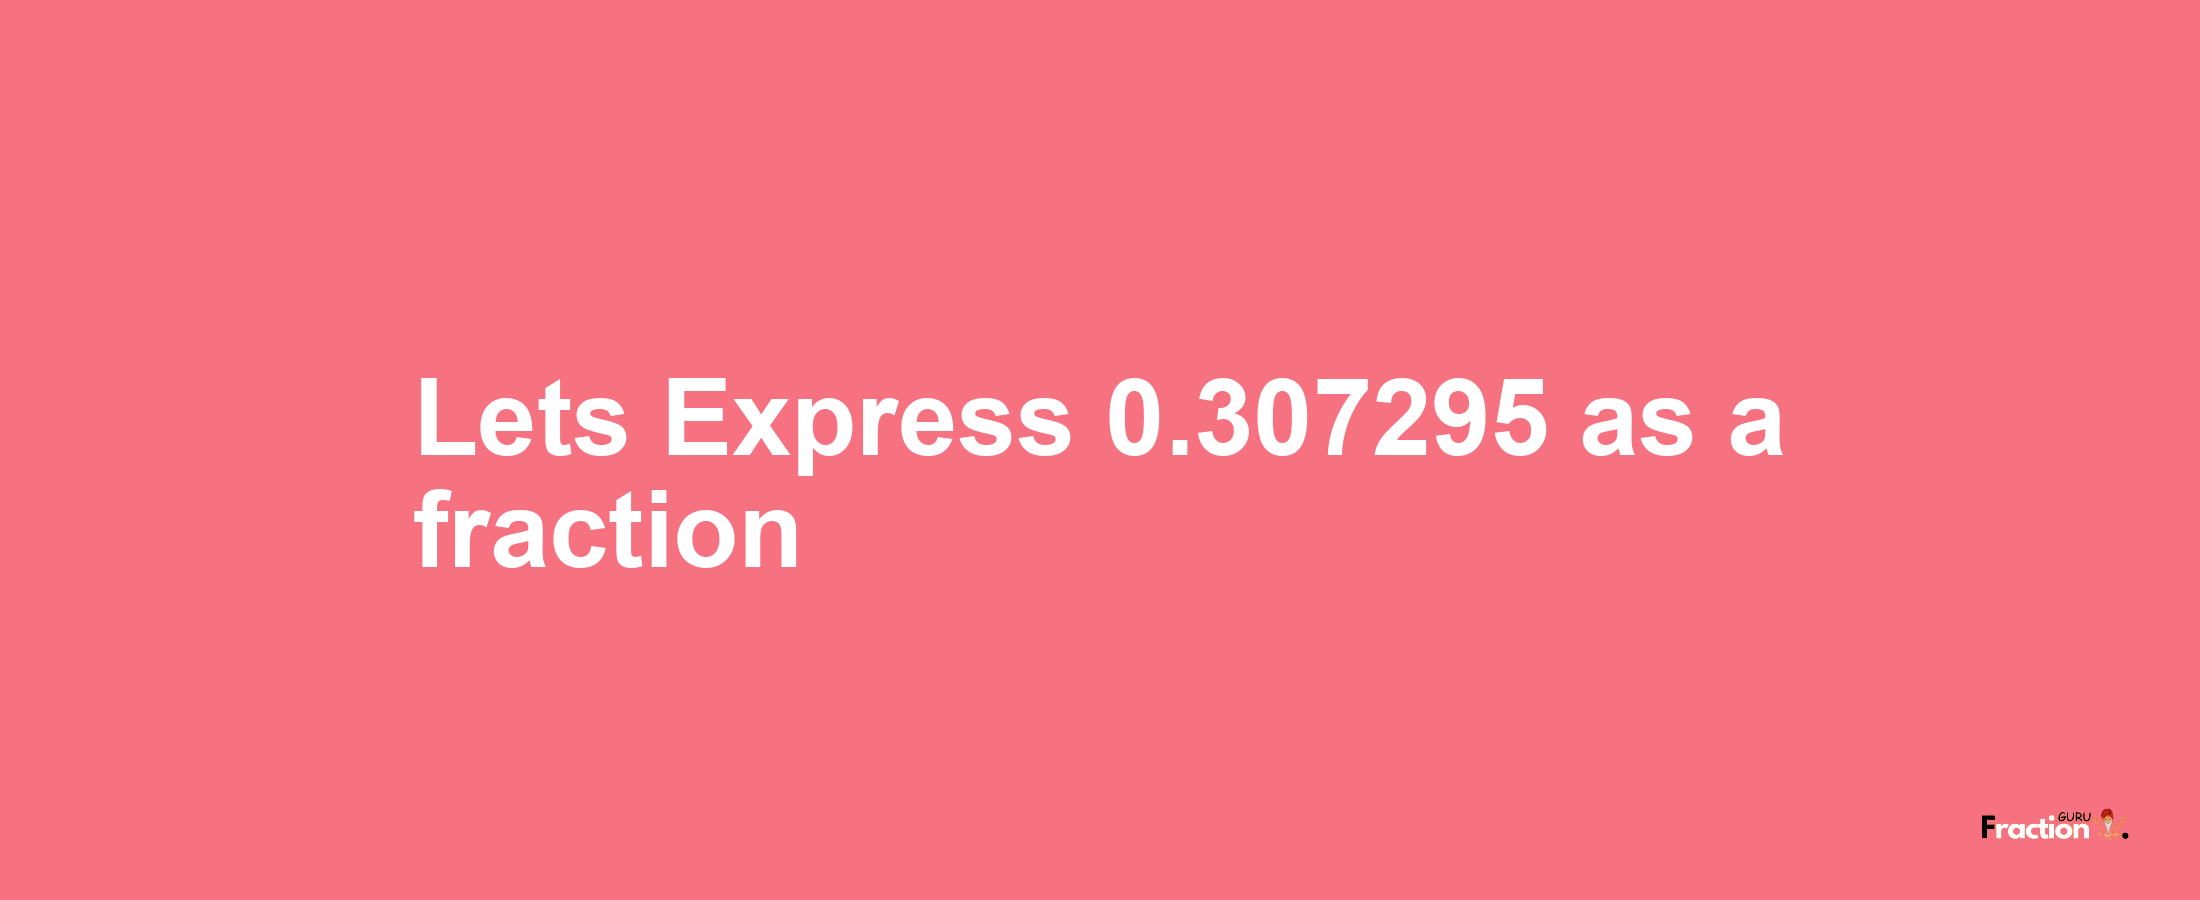 Lets Express 0.307295 as afraction